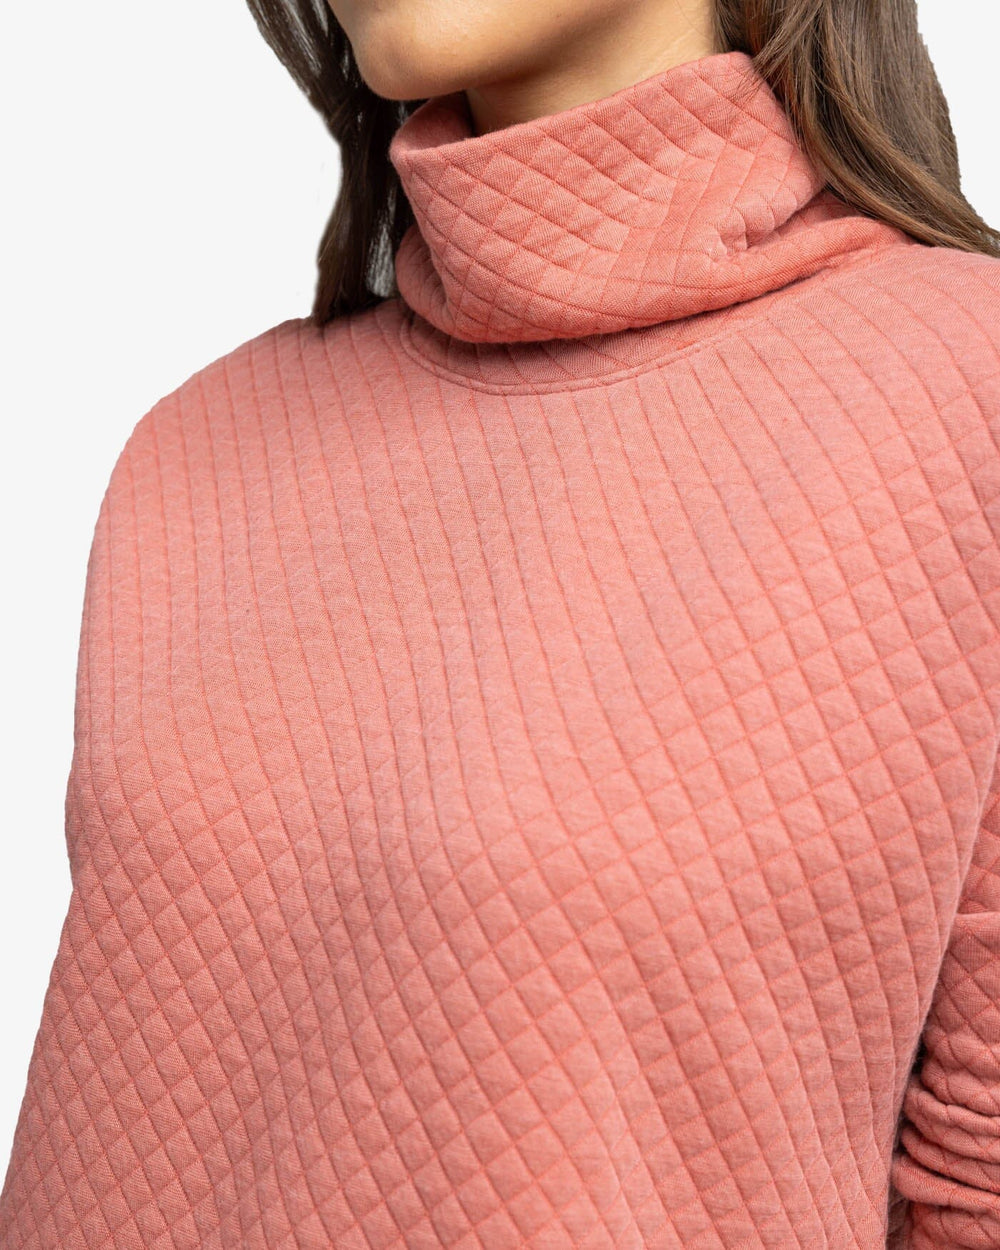 The detail view of the Southern Tide Mellie MockNeck Sweatshirt by Southern Tide - Dusty Coral